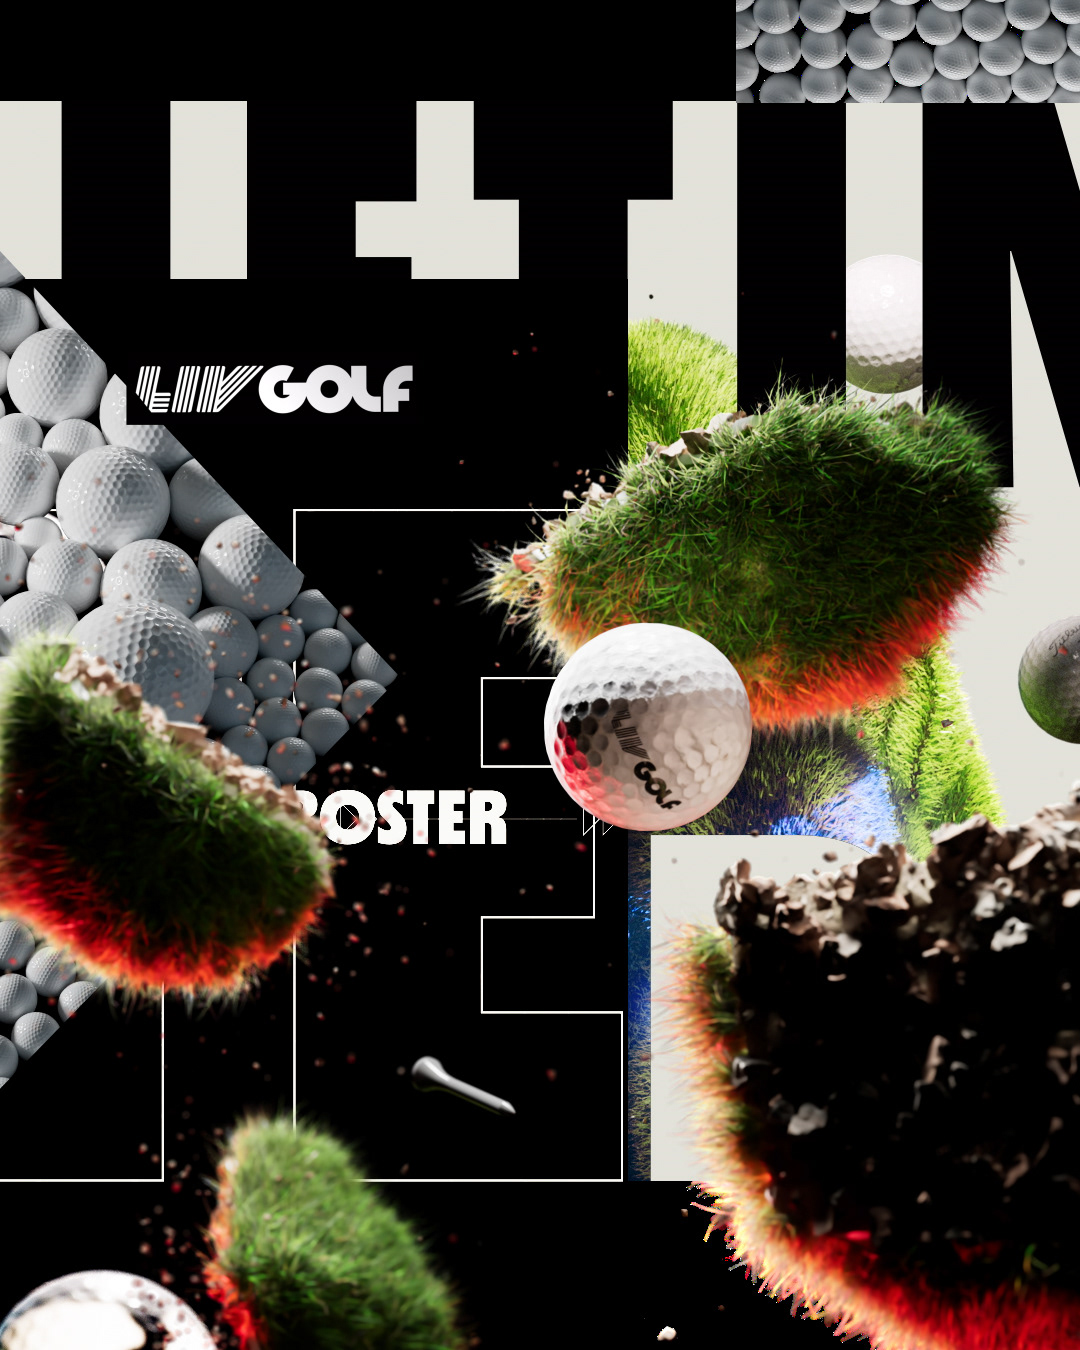 2d 3d Design and animation work for liv golf using after effects cinema 4d Houdini red shift 